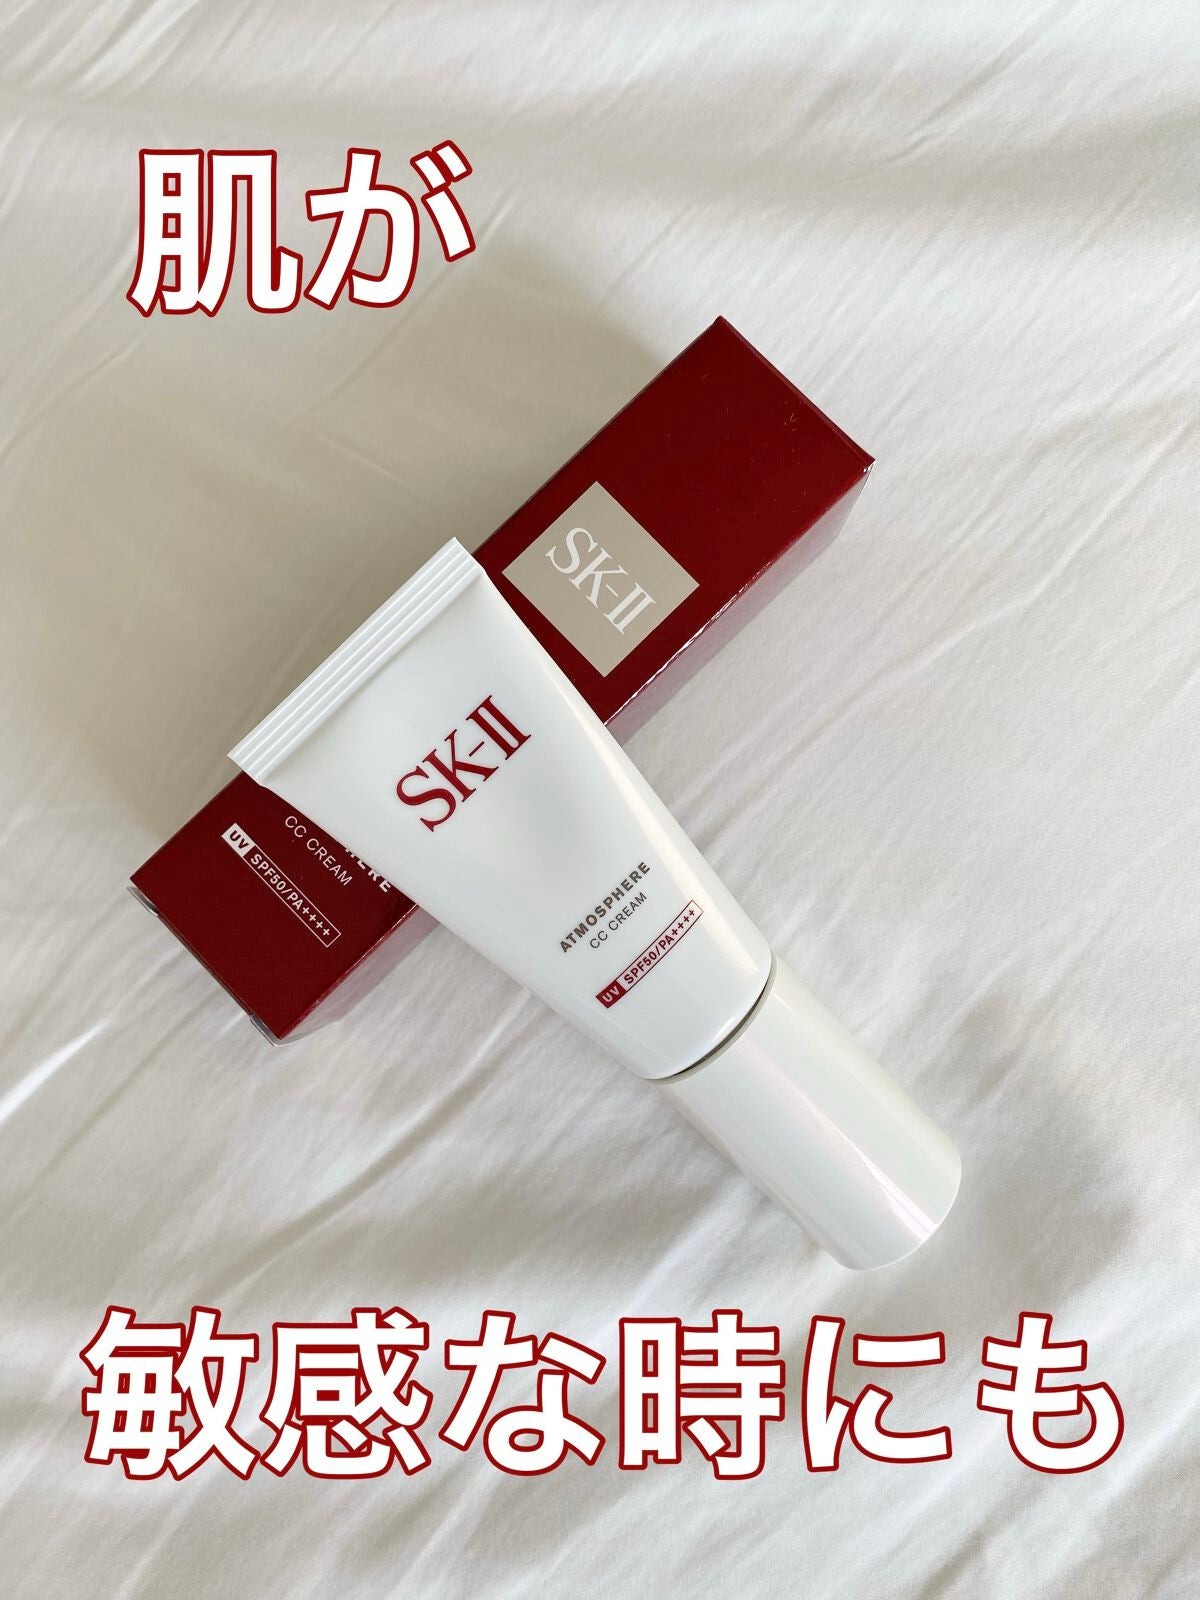 sk ii atmosphere cc cream review